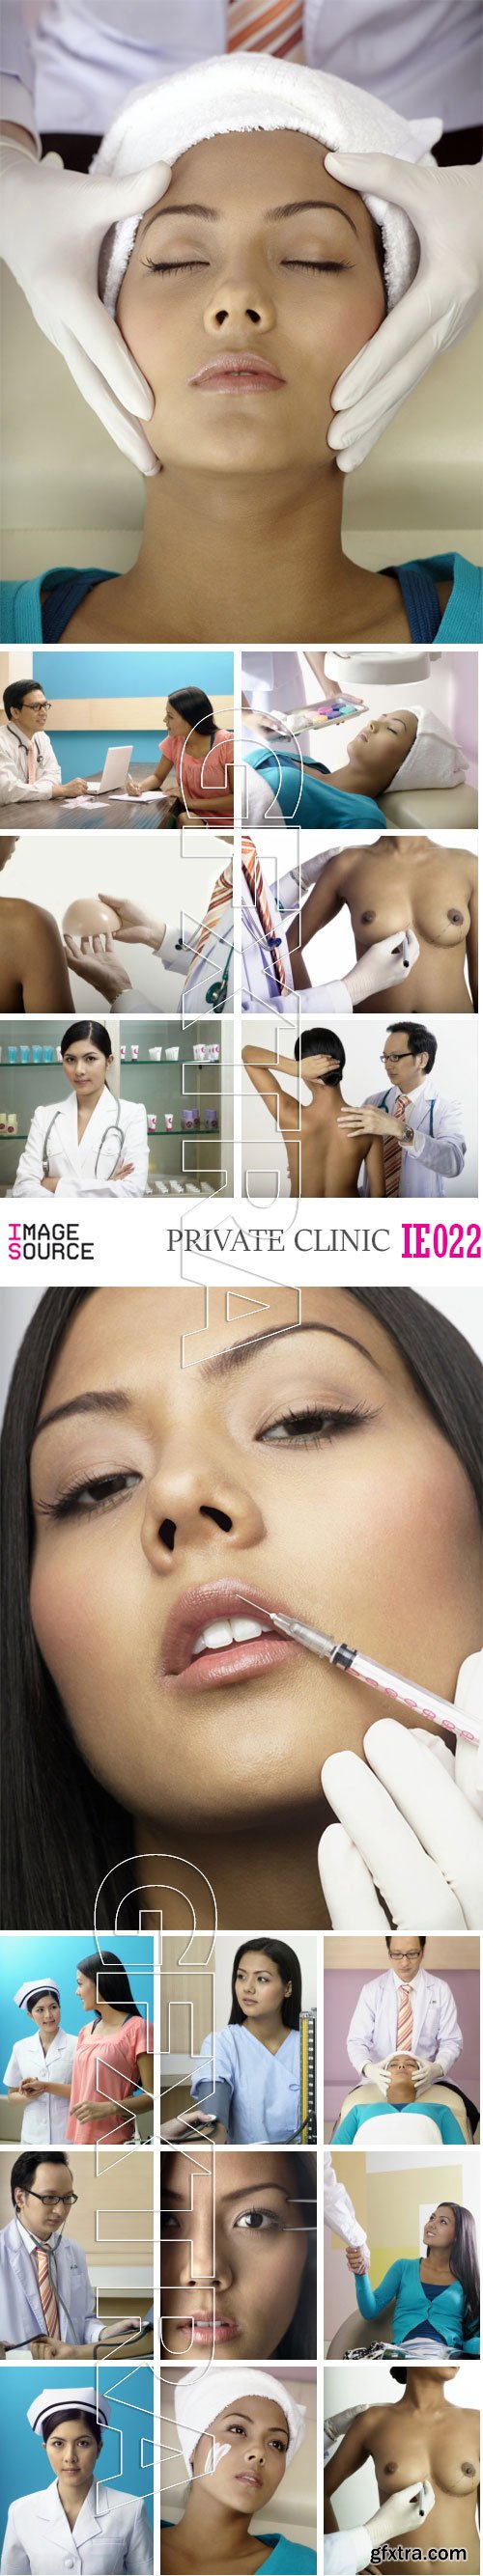 Image Source IE022 Private Clinic